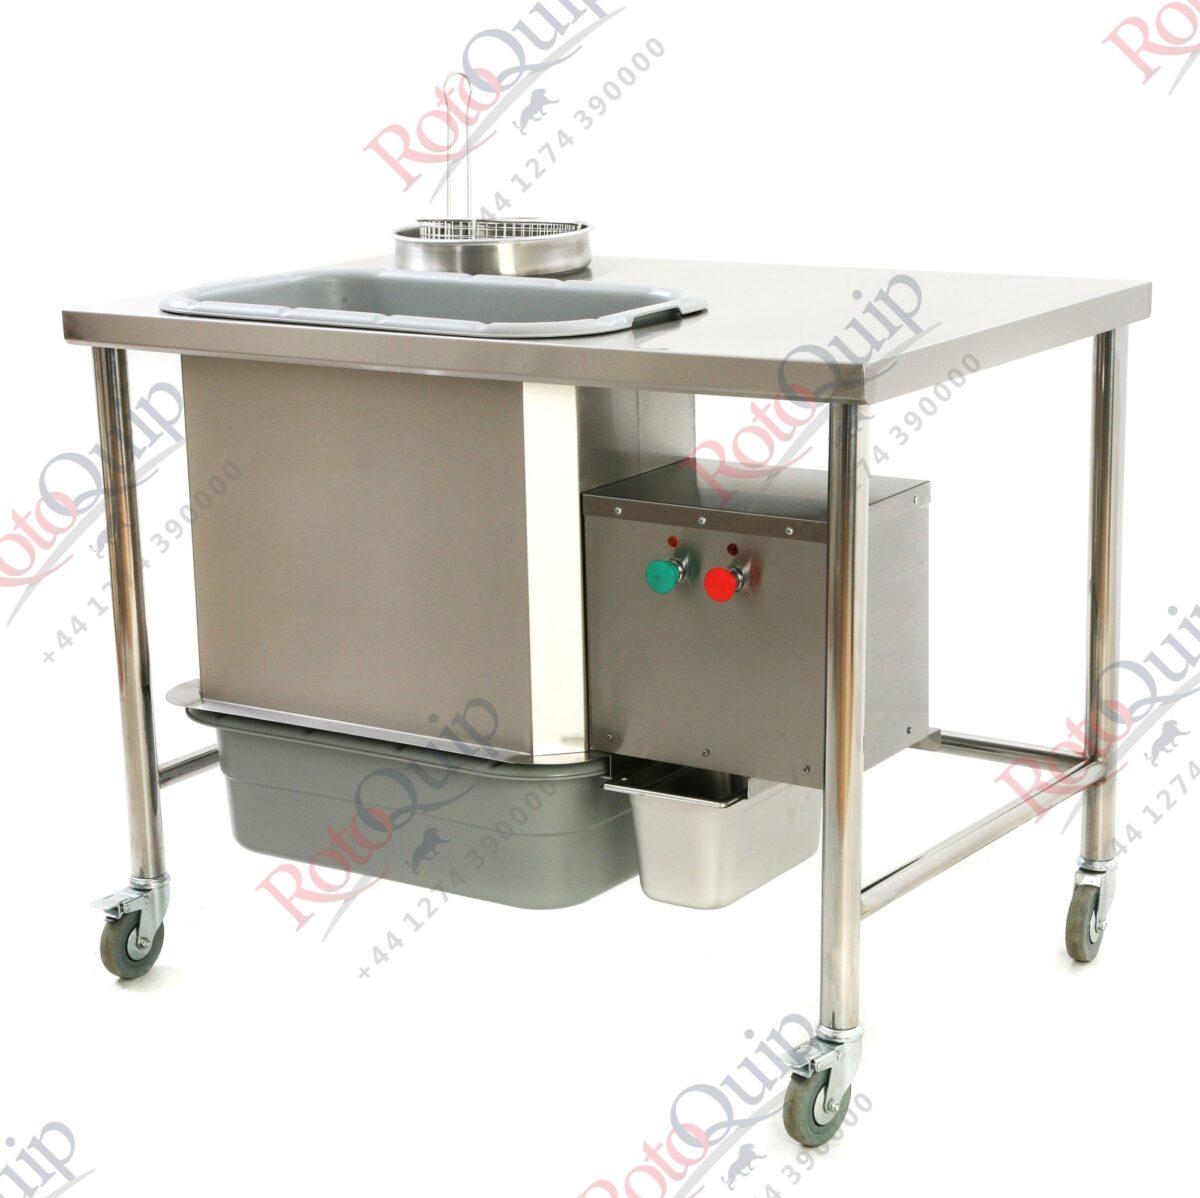 RBT-1 – Automatic Breading Table – Standard